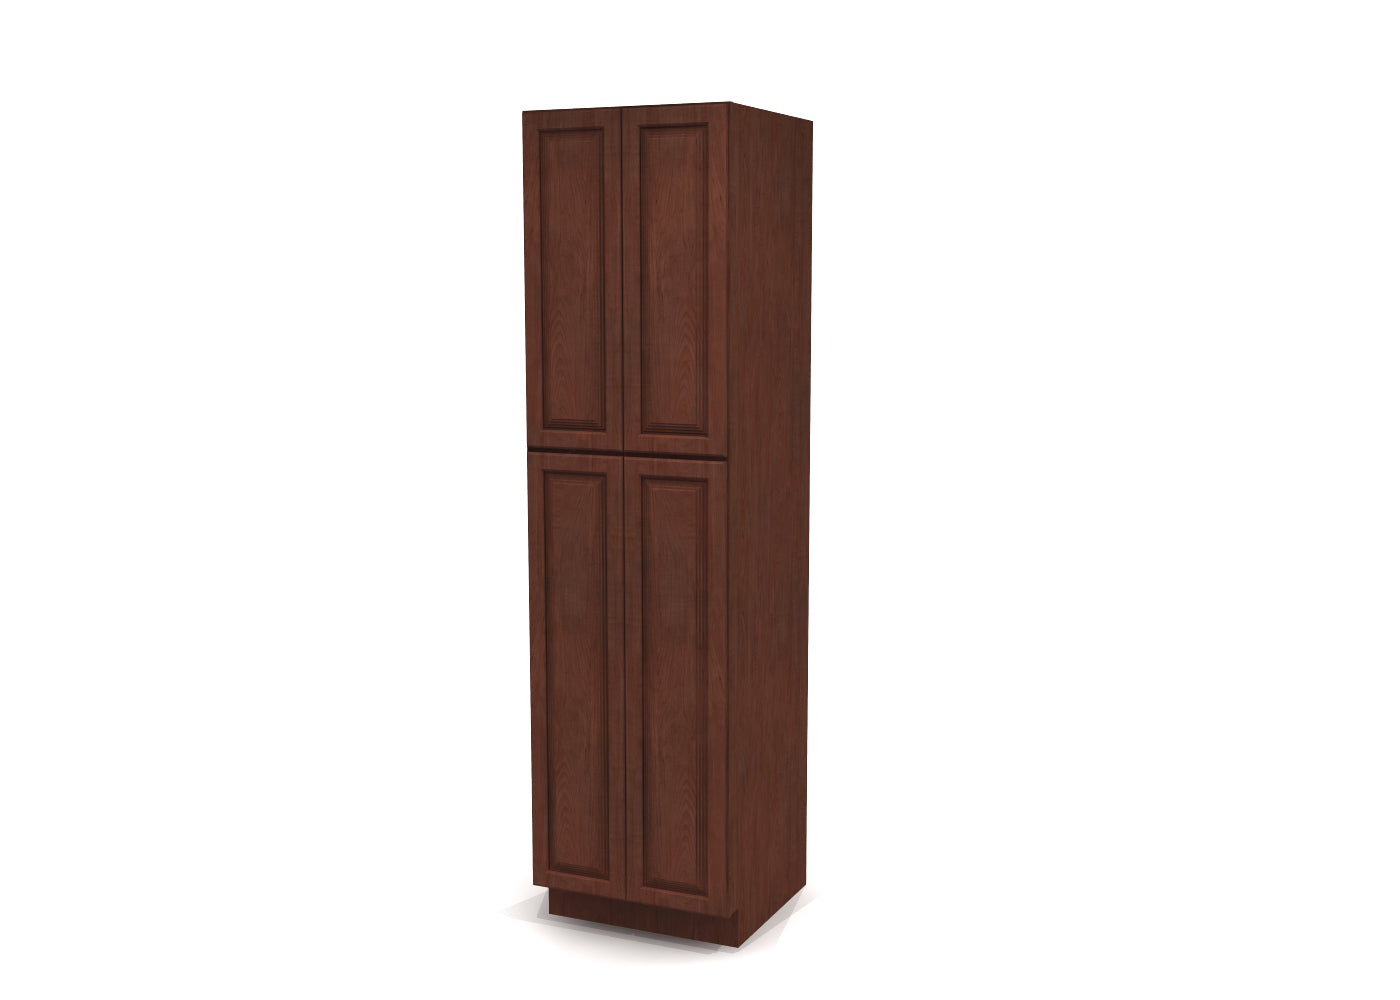 Utility Pantry Double Door 90" by 24" Wide Cherry Raised Panel Cabinet